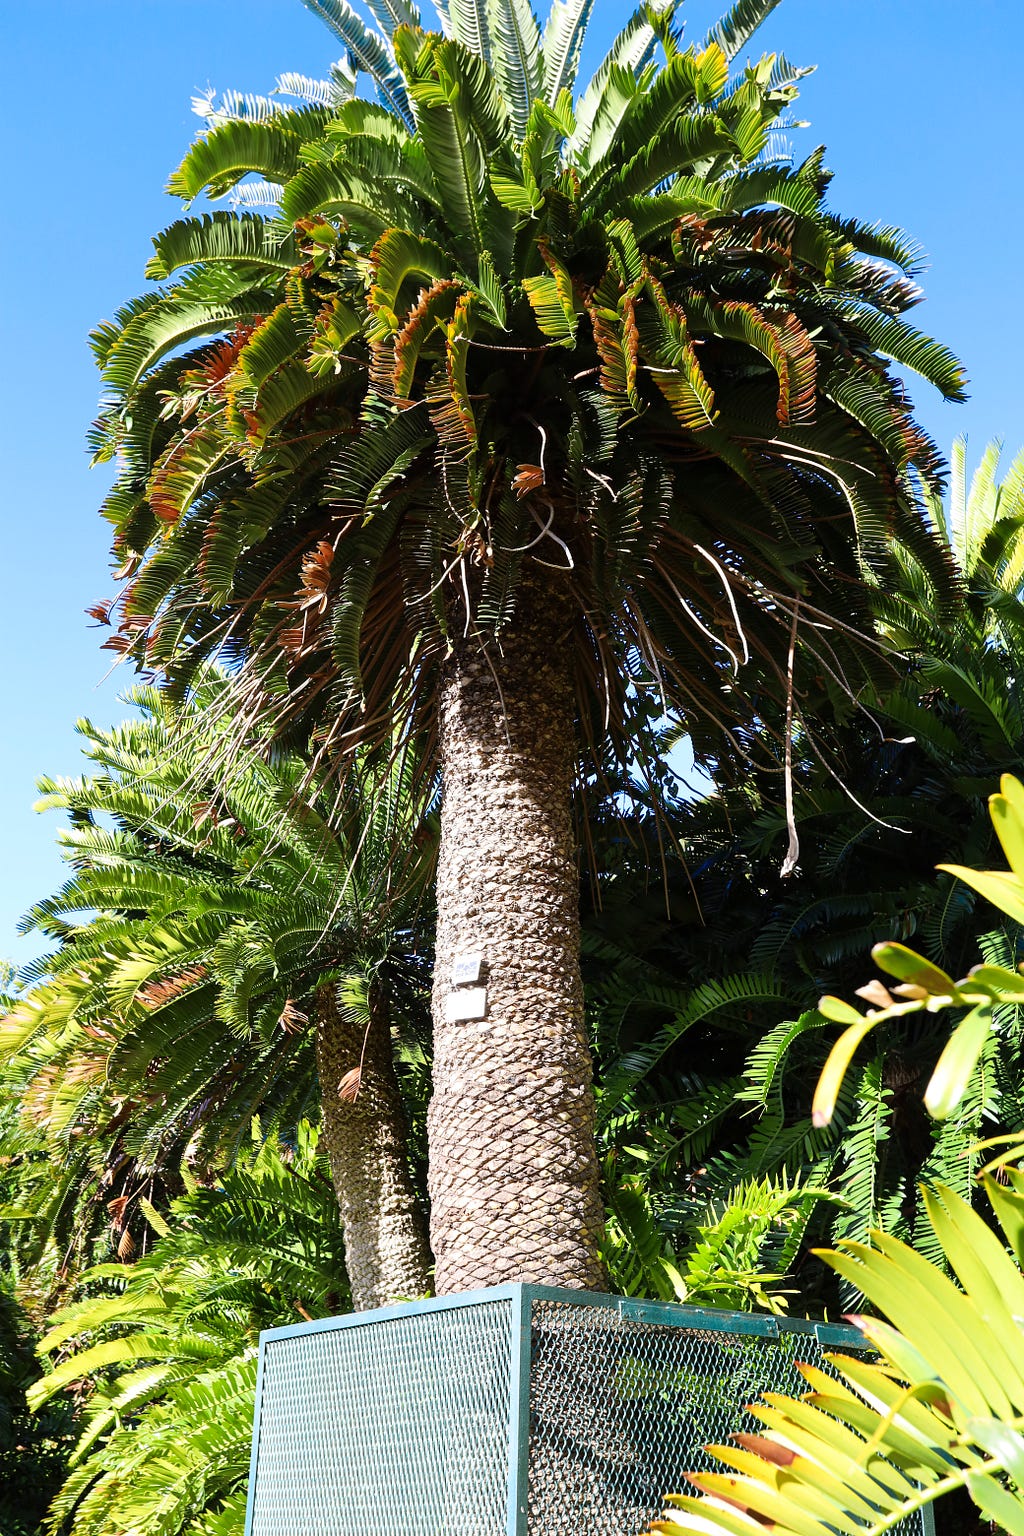 Wood’s Cycad: The Lonliest Cycad in the World.